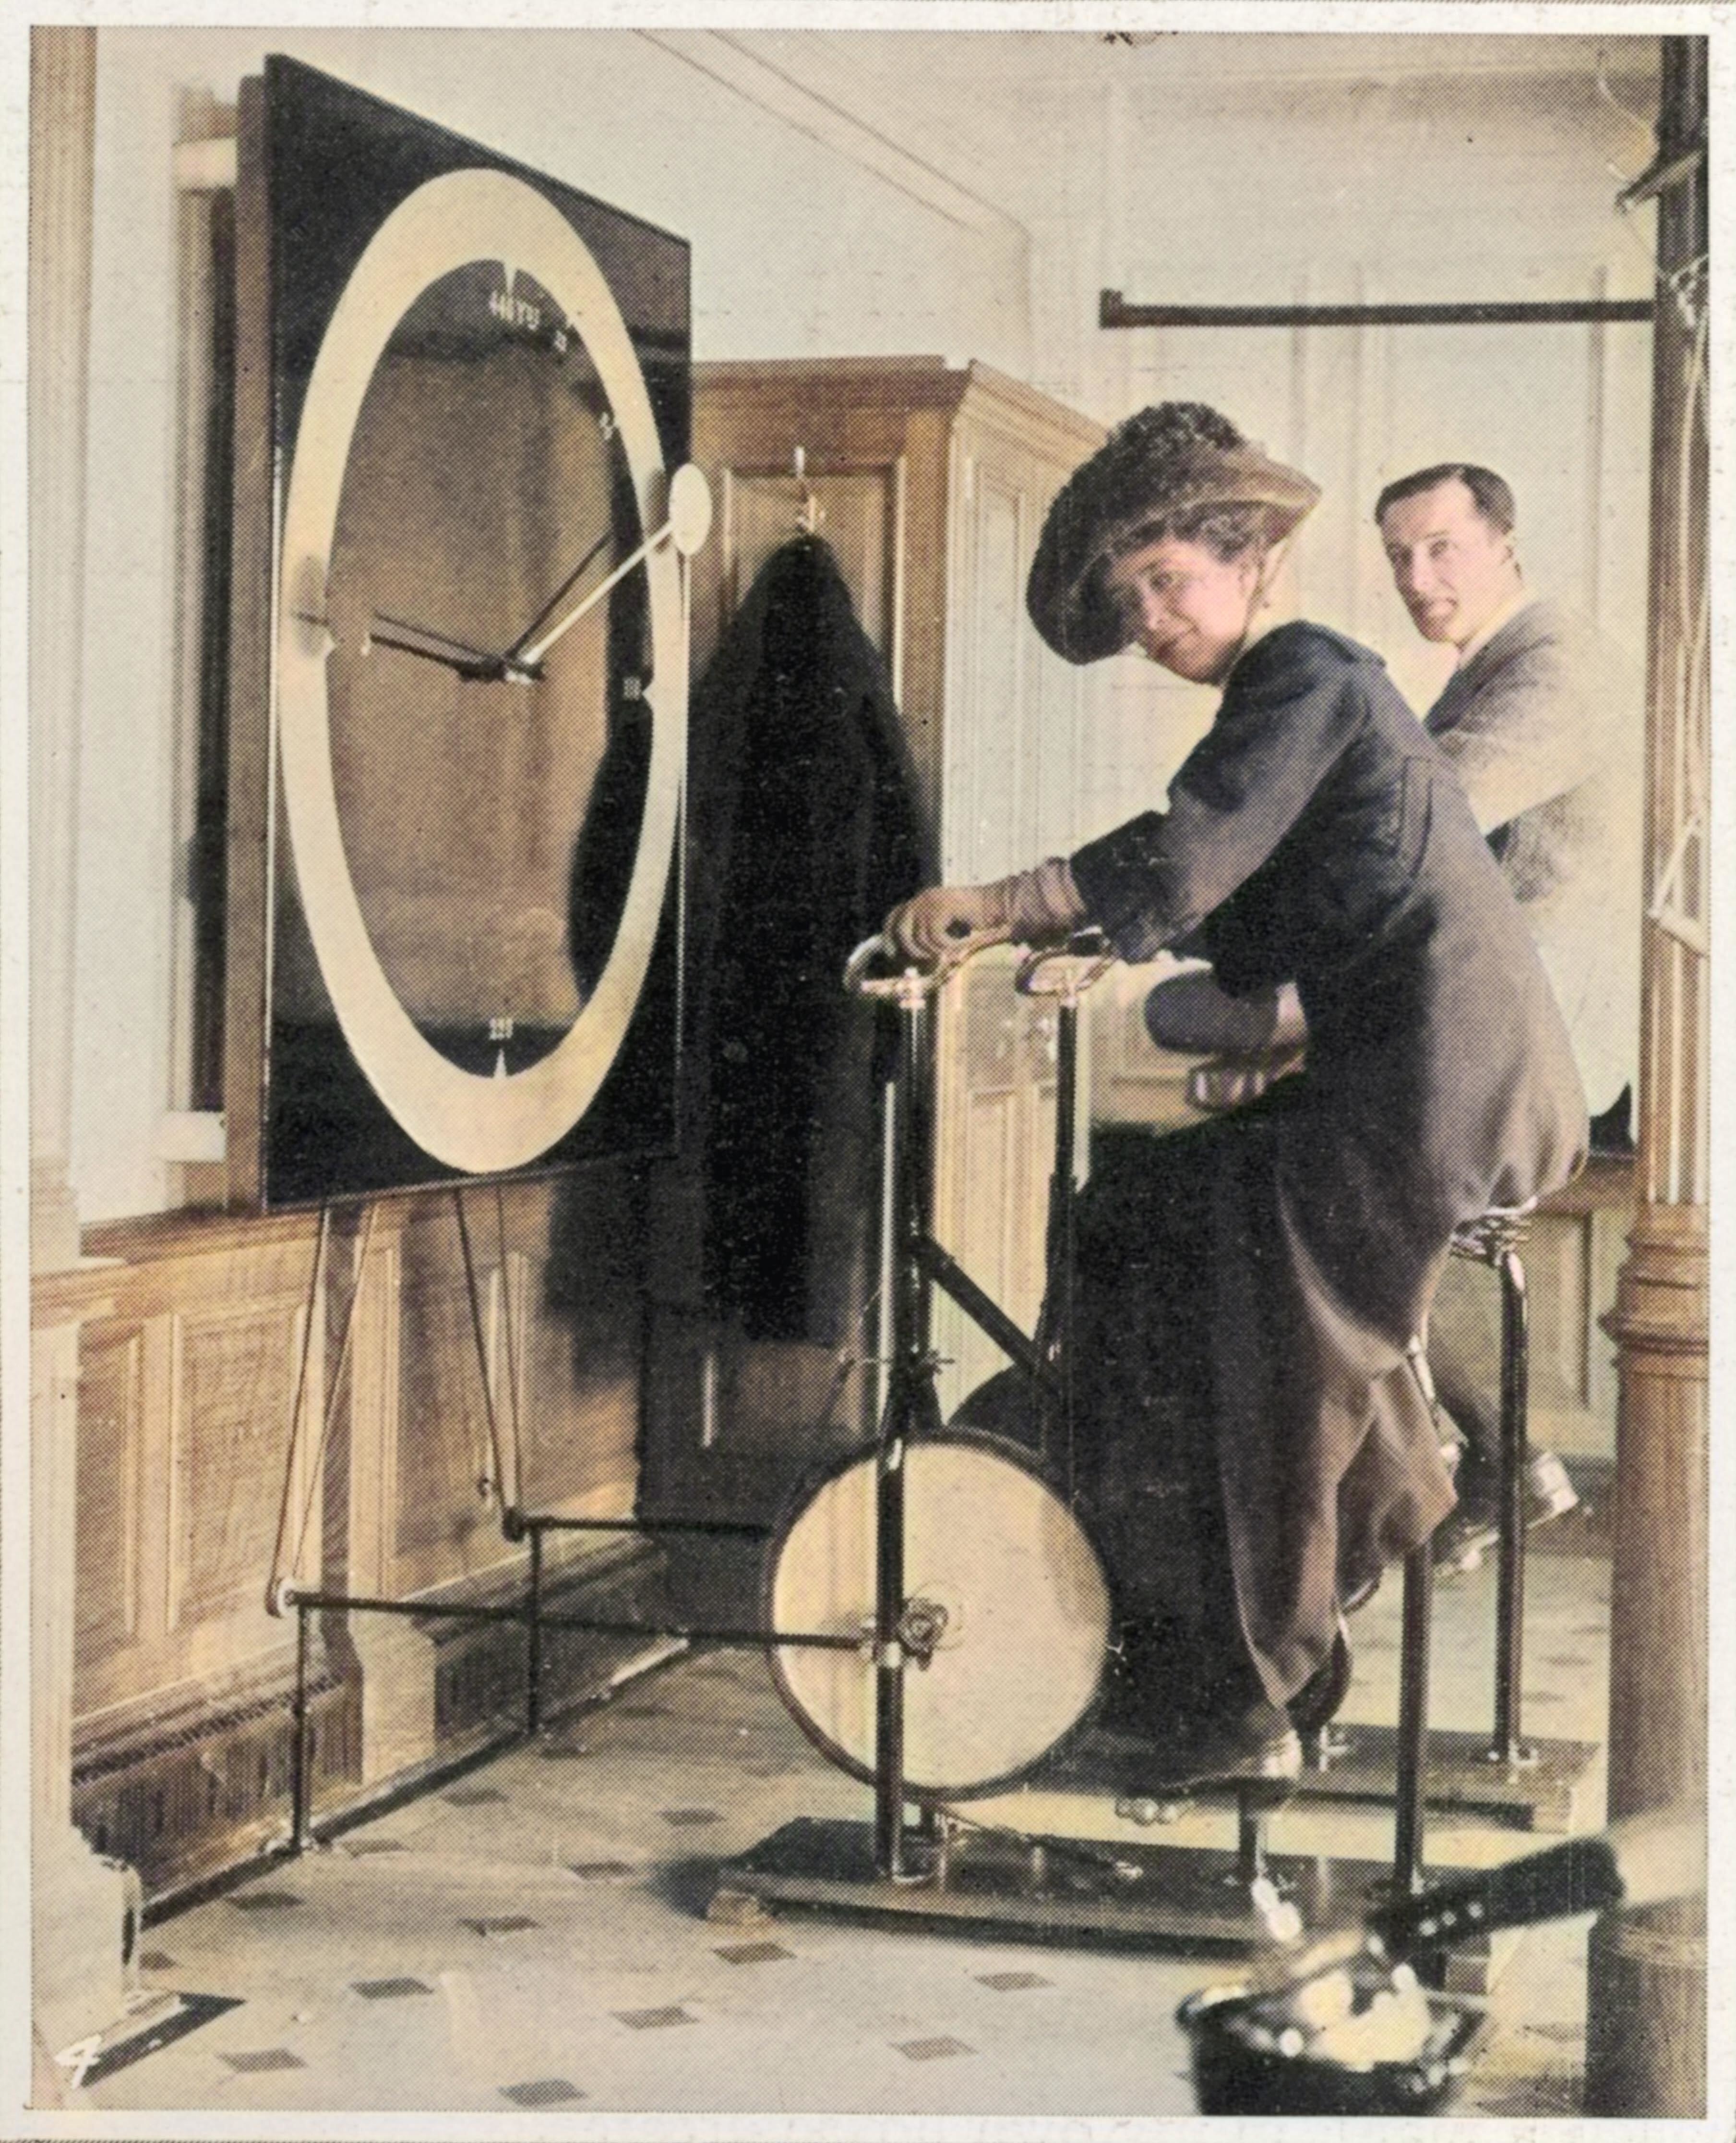 A woman wearing a long dress, coat, and ornate hat sits on an exercise bike next to a man also on a bike and looks at the camera